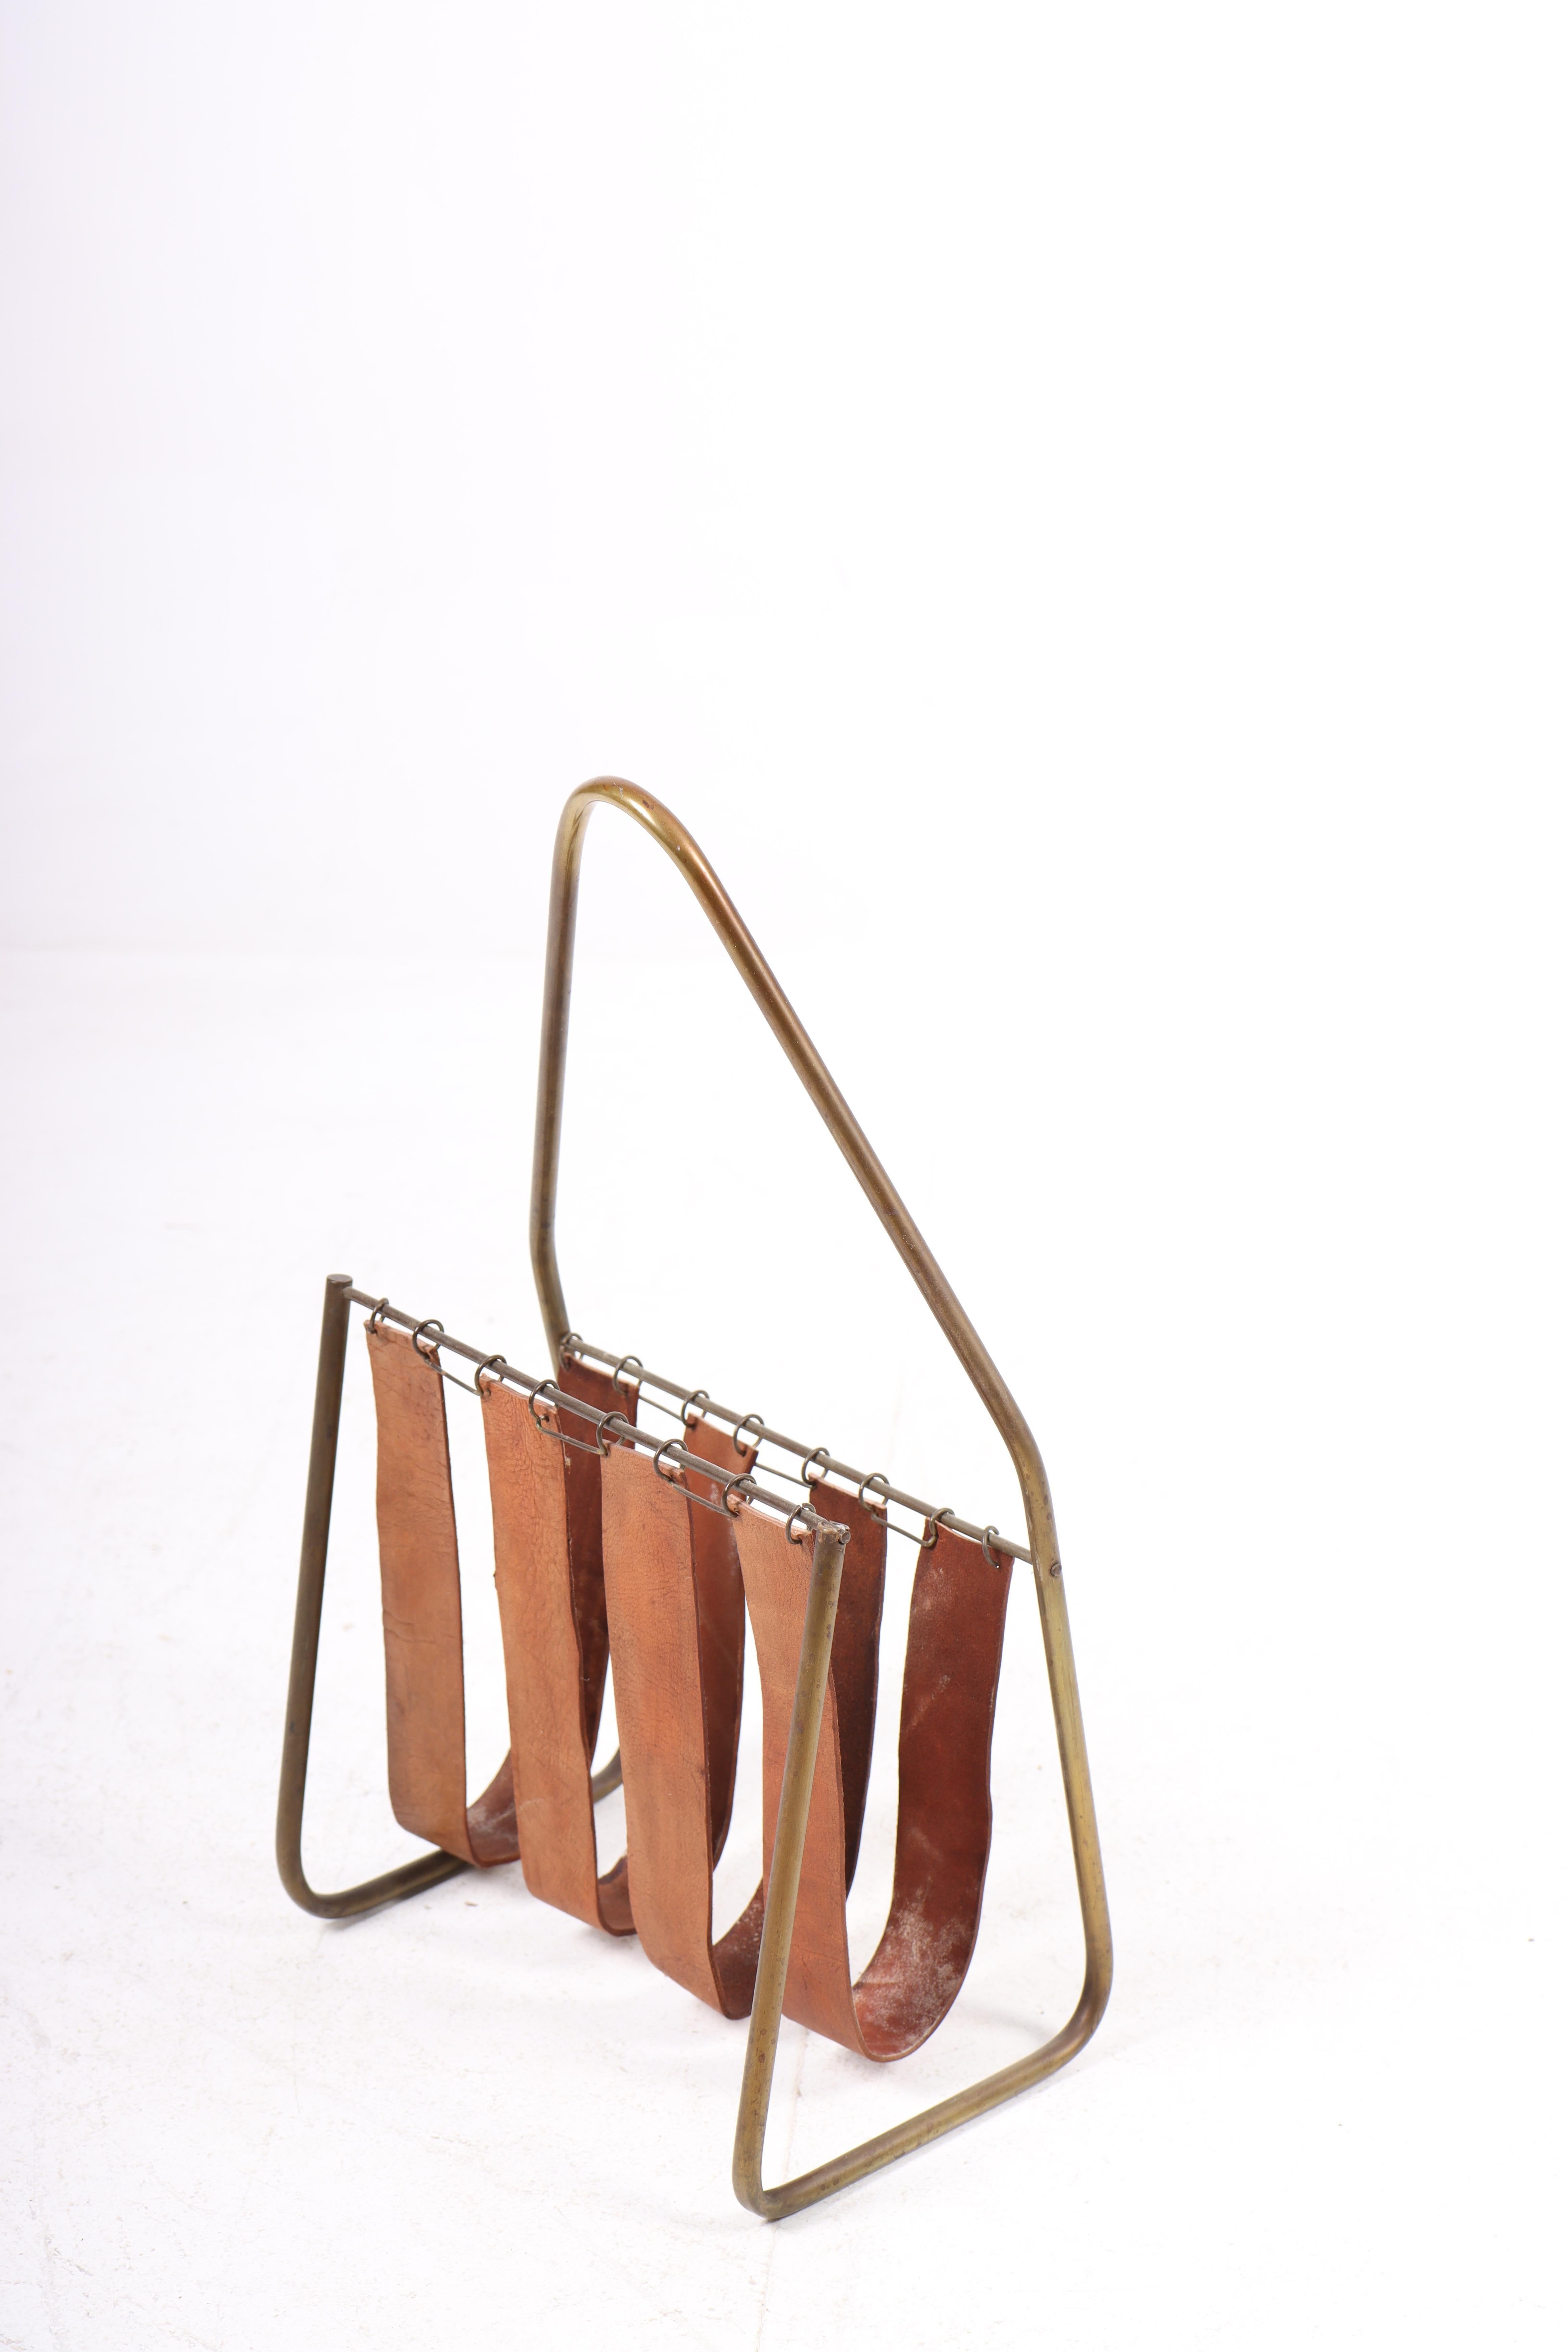 Magazine Stand in Patinated Leather and Brass by Illums Bolighus, 1950s For Sale 4